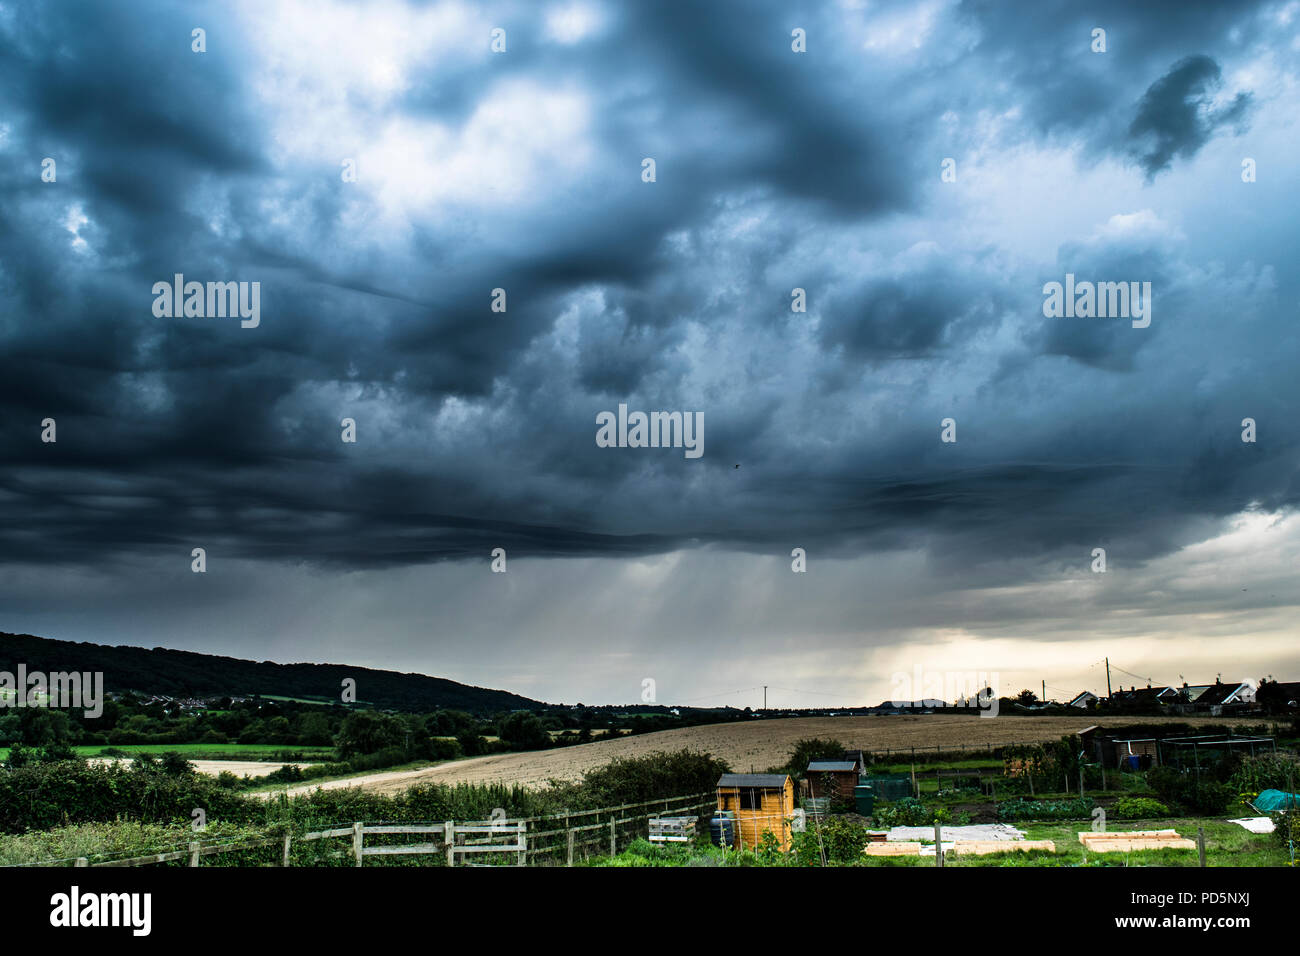 dark and brooding rain storm over somerset countryside Stock Photo